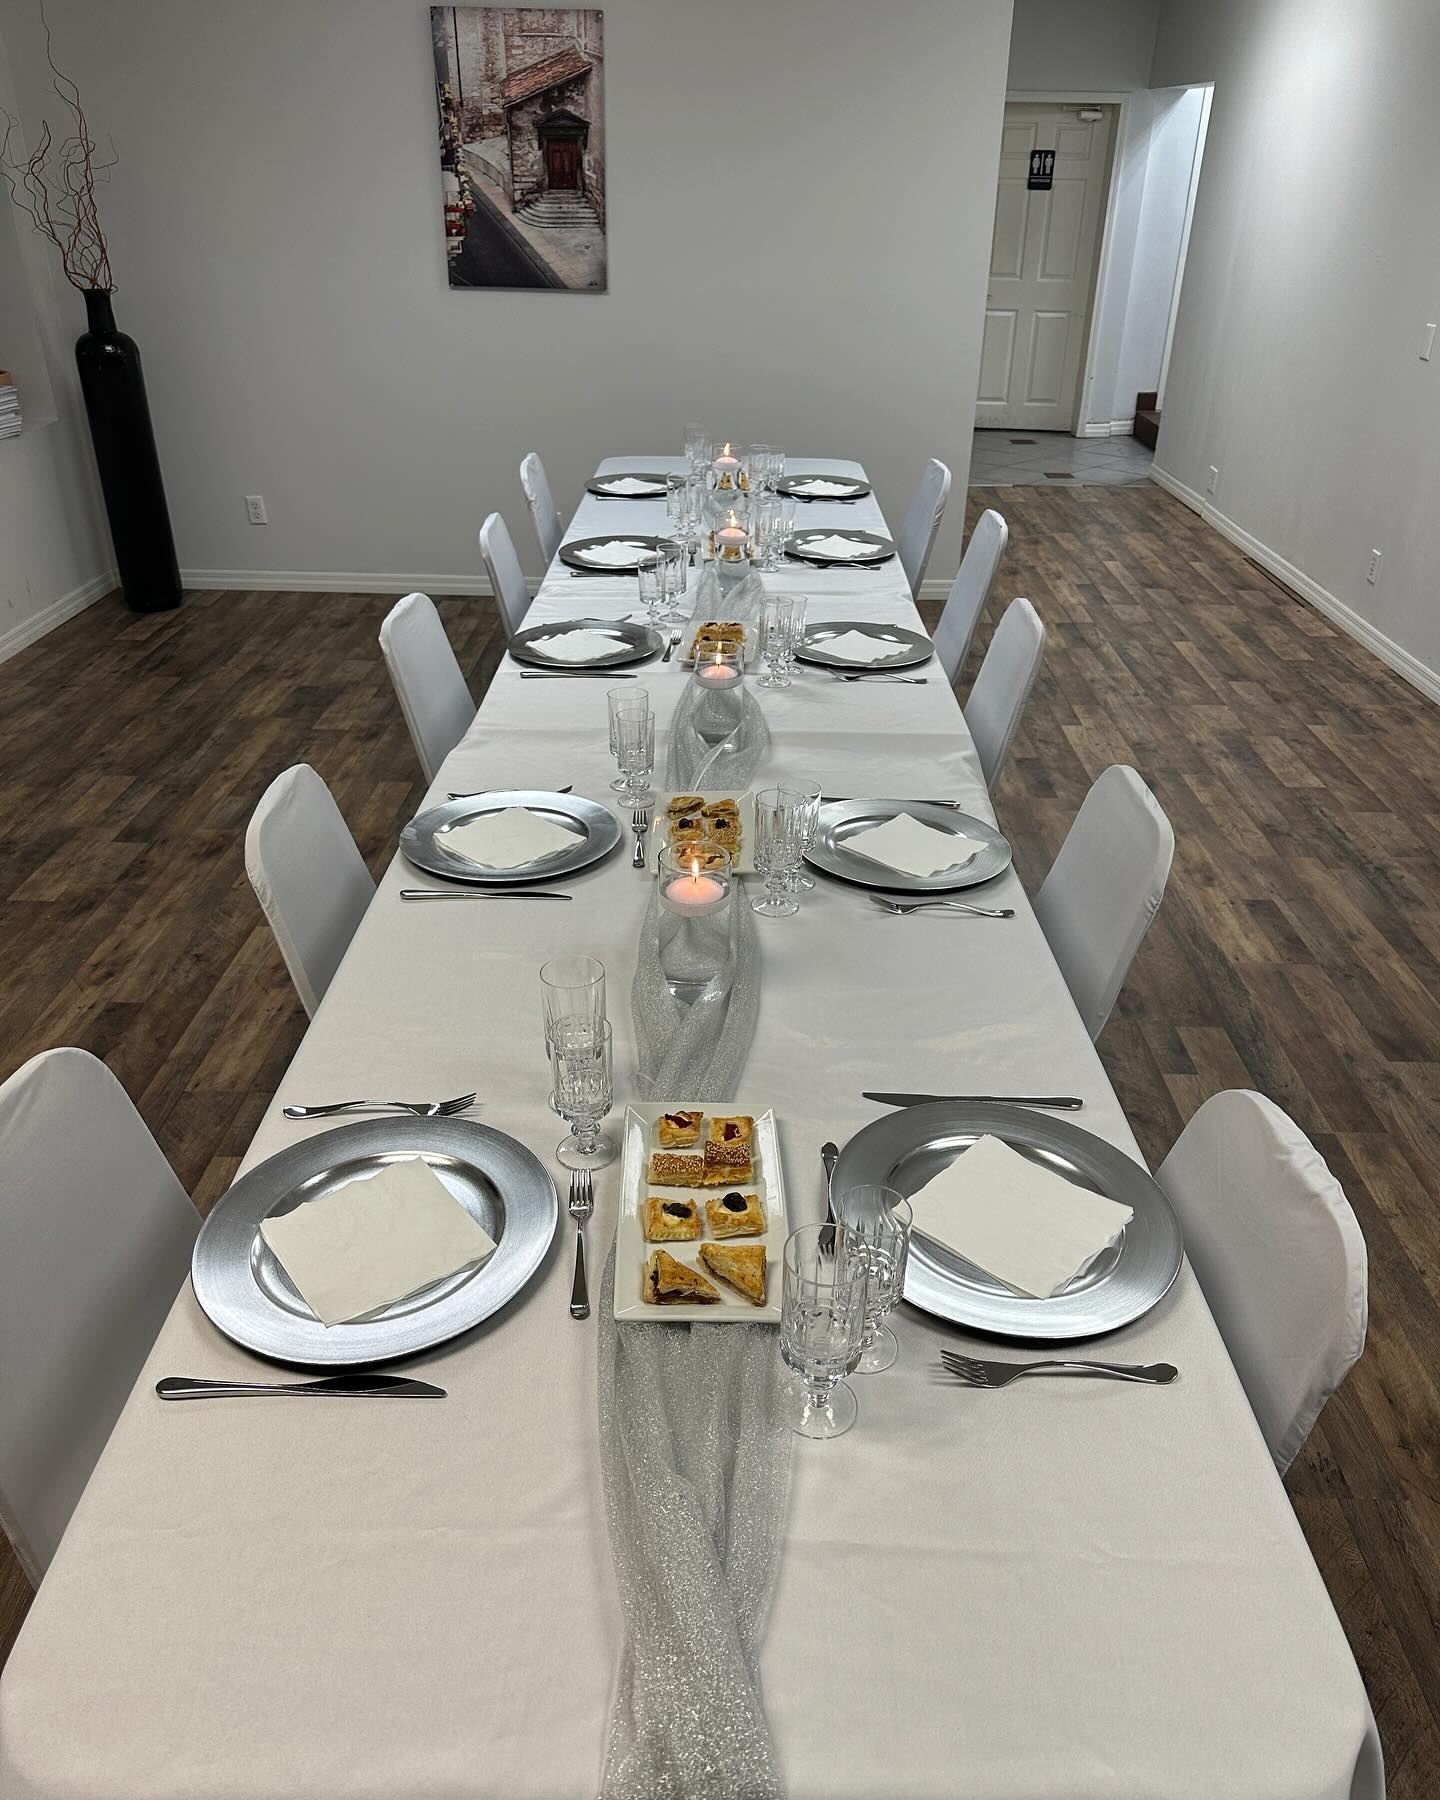 A long table set with dishes and candles for a date night cooking class at Italian Kitchen in Springfield, Missouri.